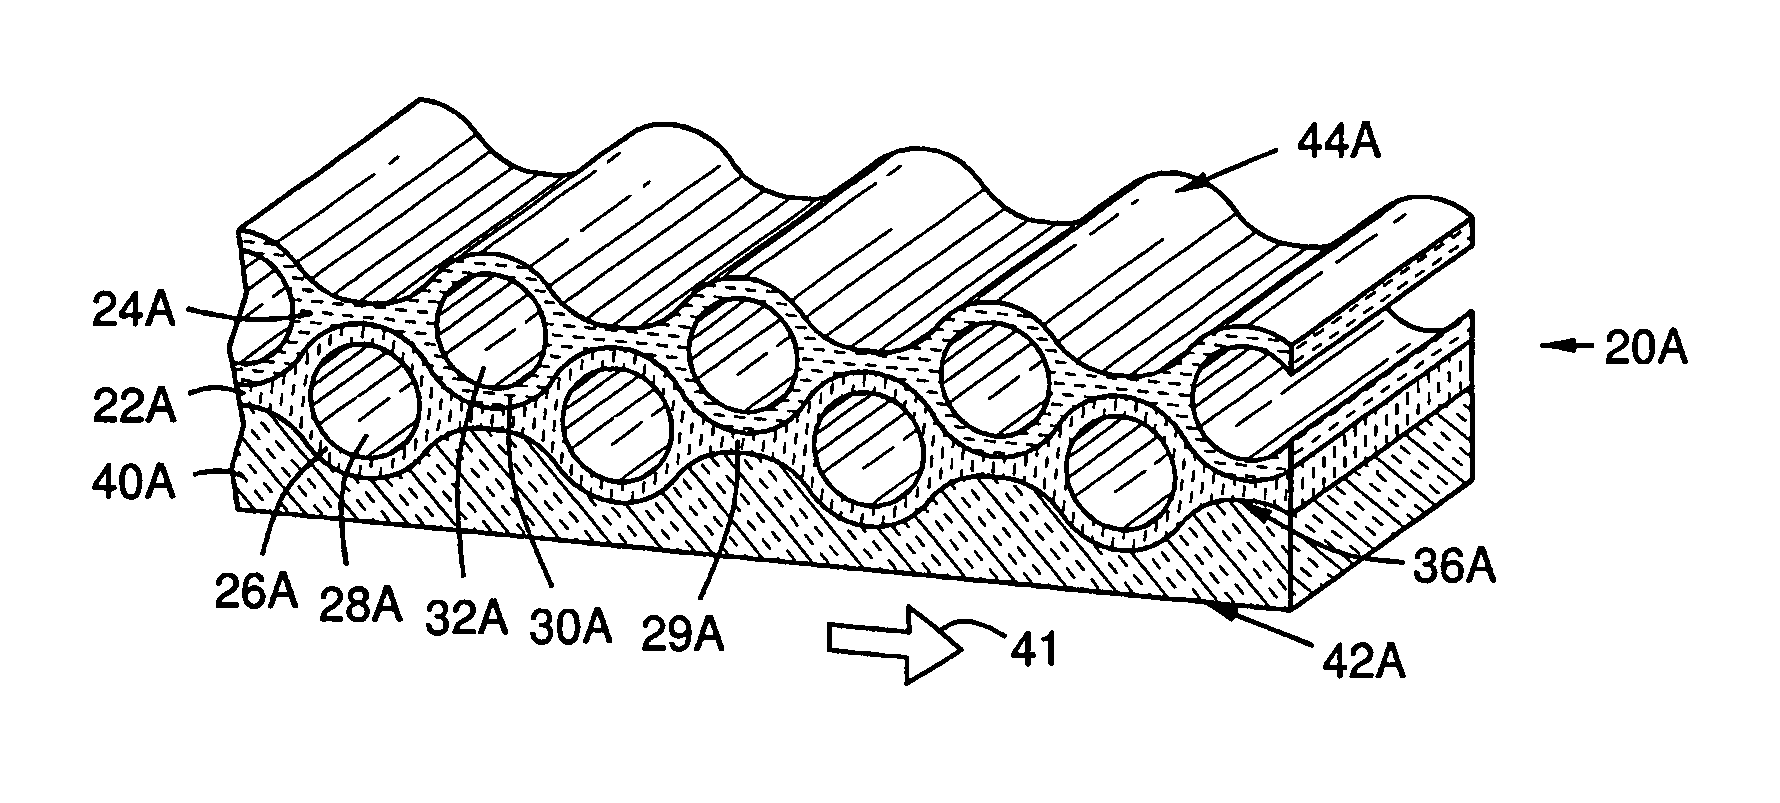 CMC wall structure with integral cooling channels